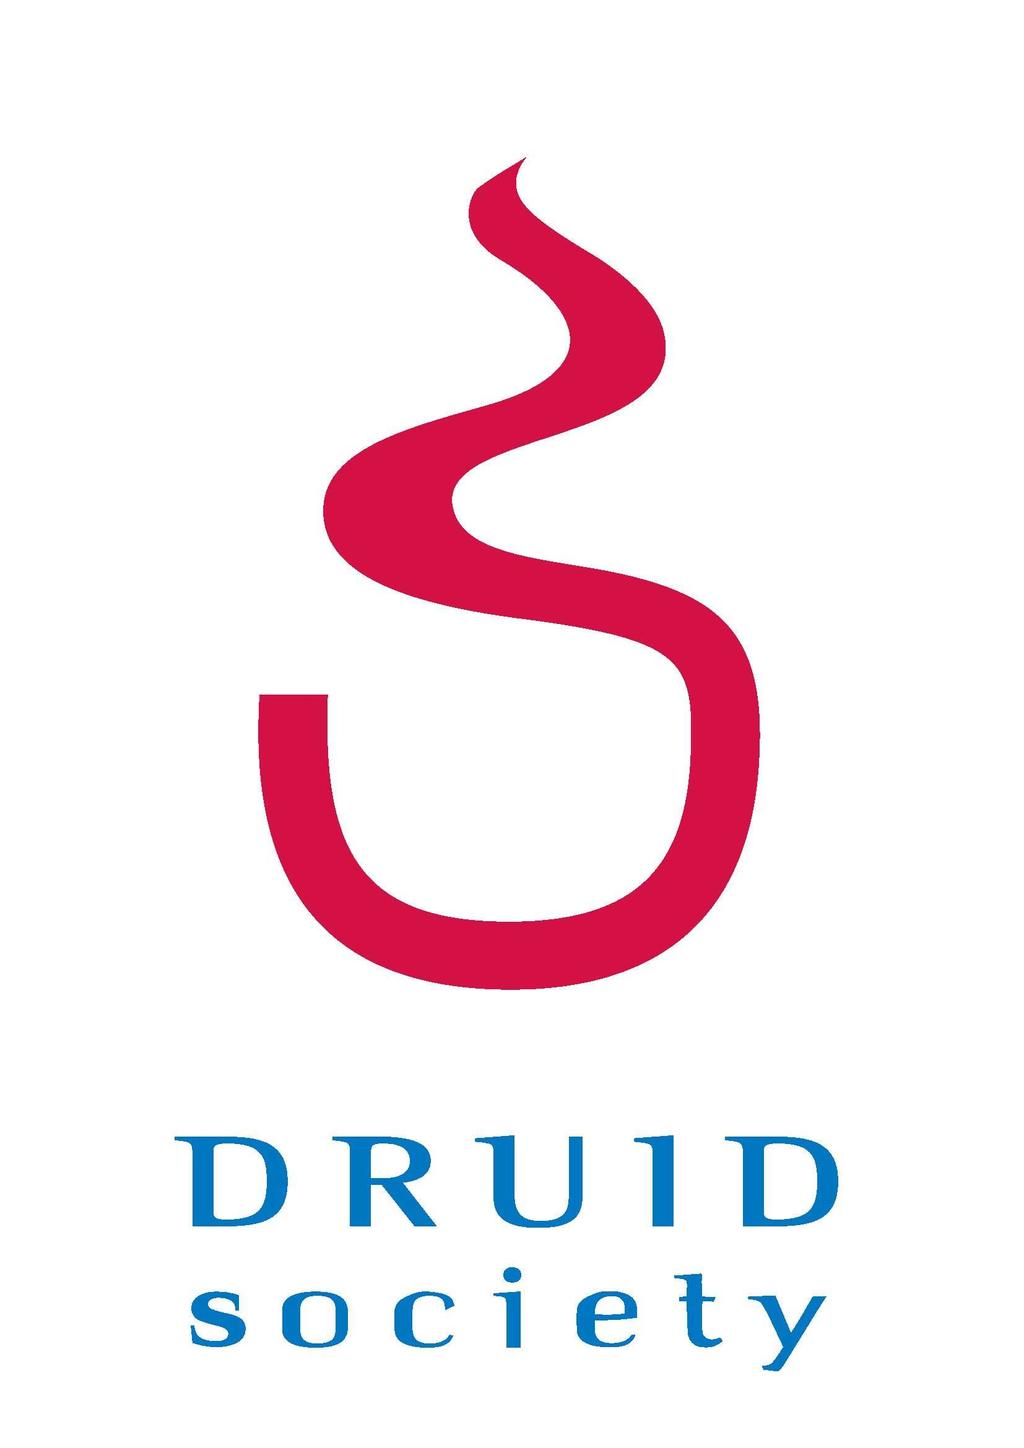 Paper to be presented at DRUID15, Rome, June 15-17, 2015 (Coorganized with LUISS) Determinants of Academic Startup?